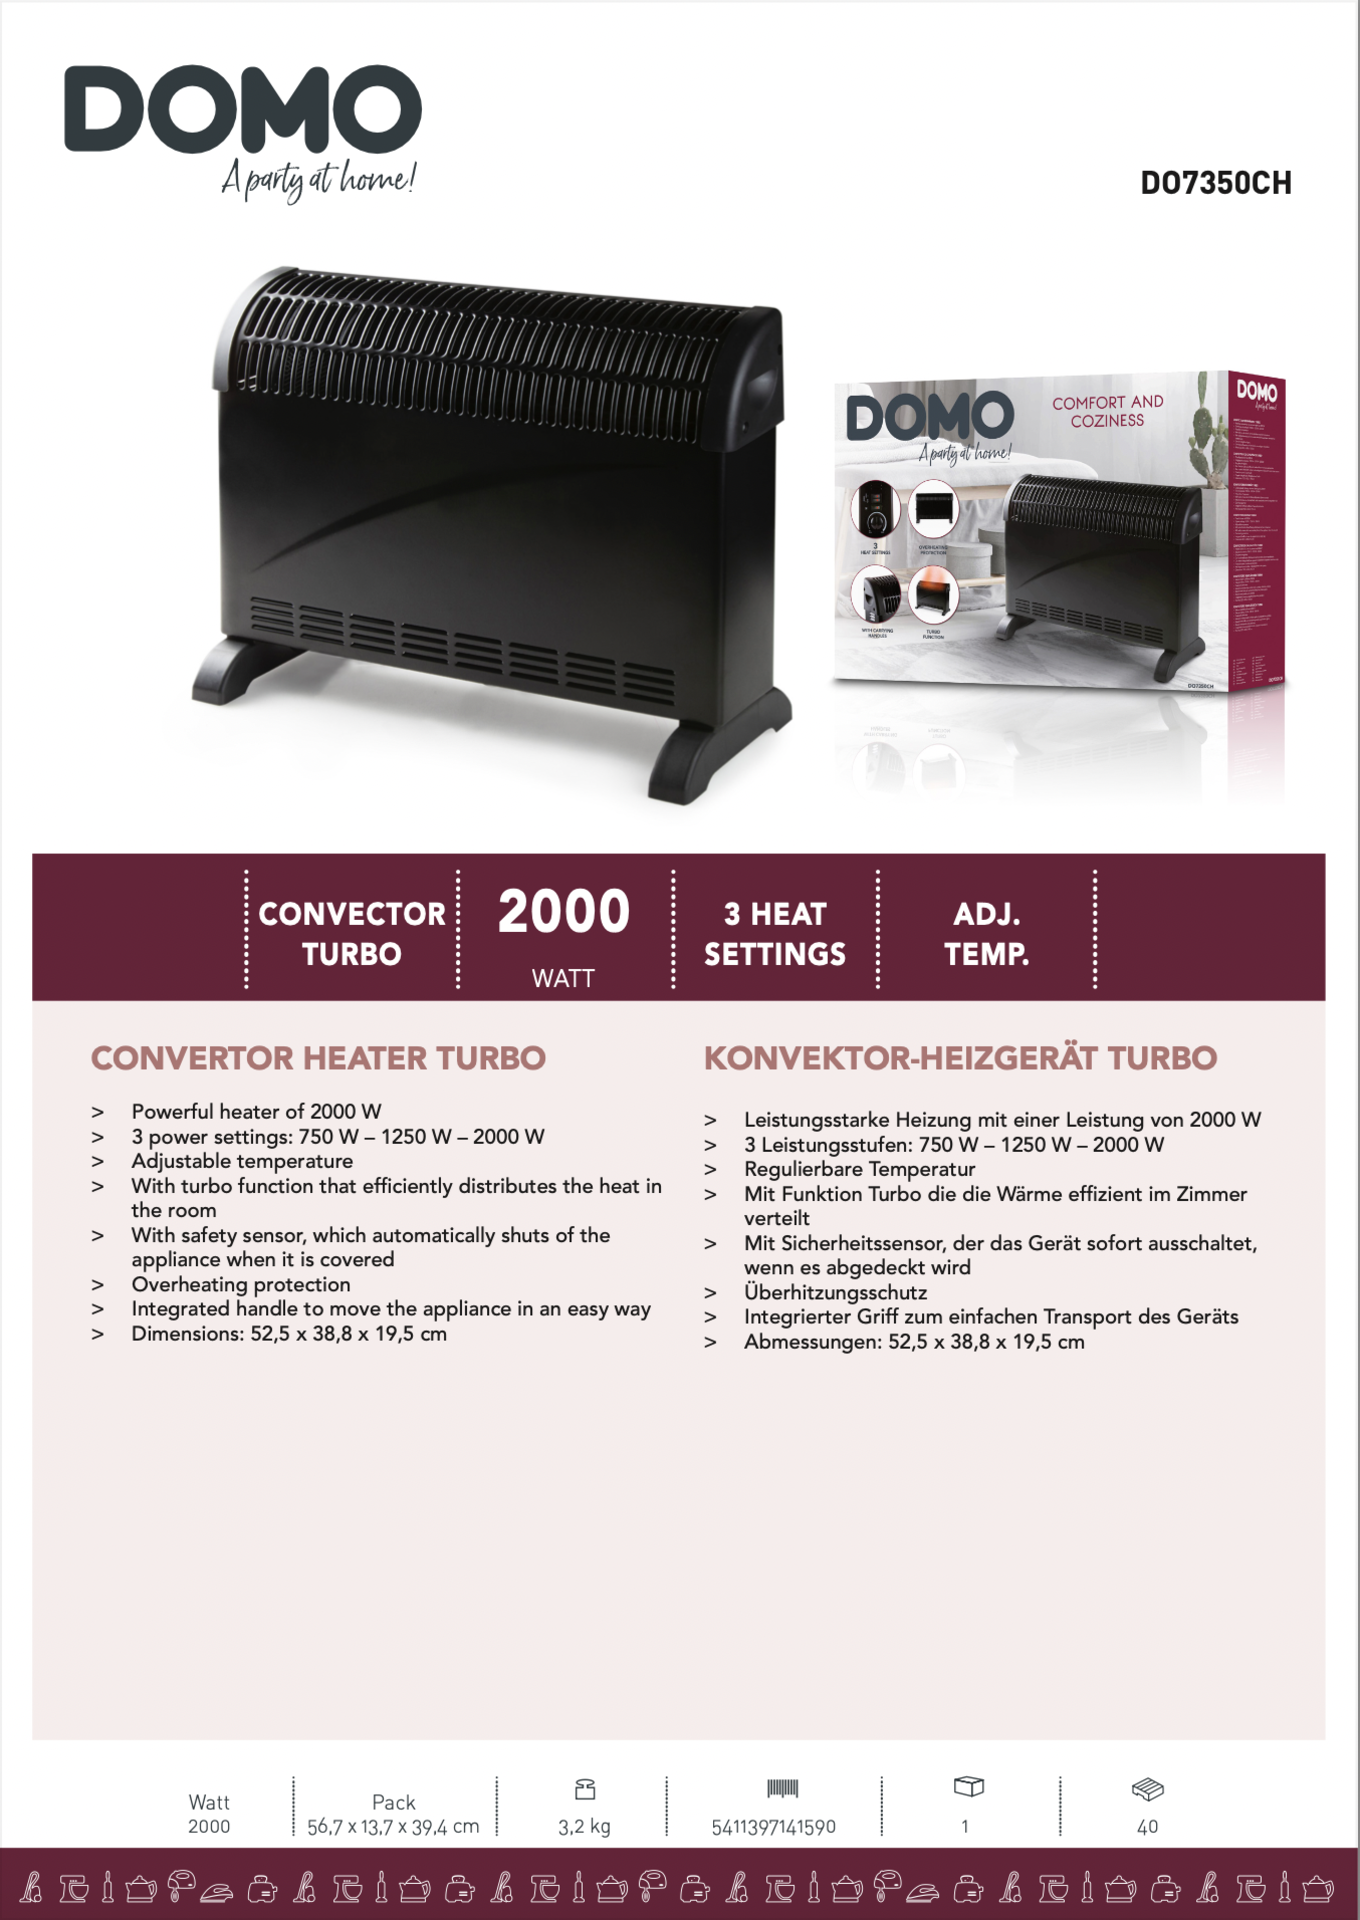 5 x DOMO Convector Heater Turbo 2000W RRP £ 55 each - Image 2 of 8